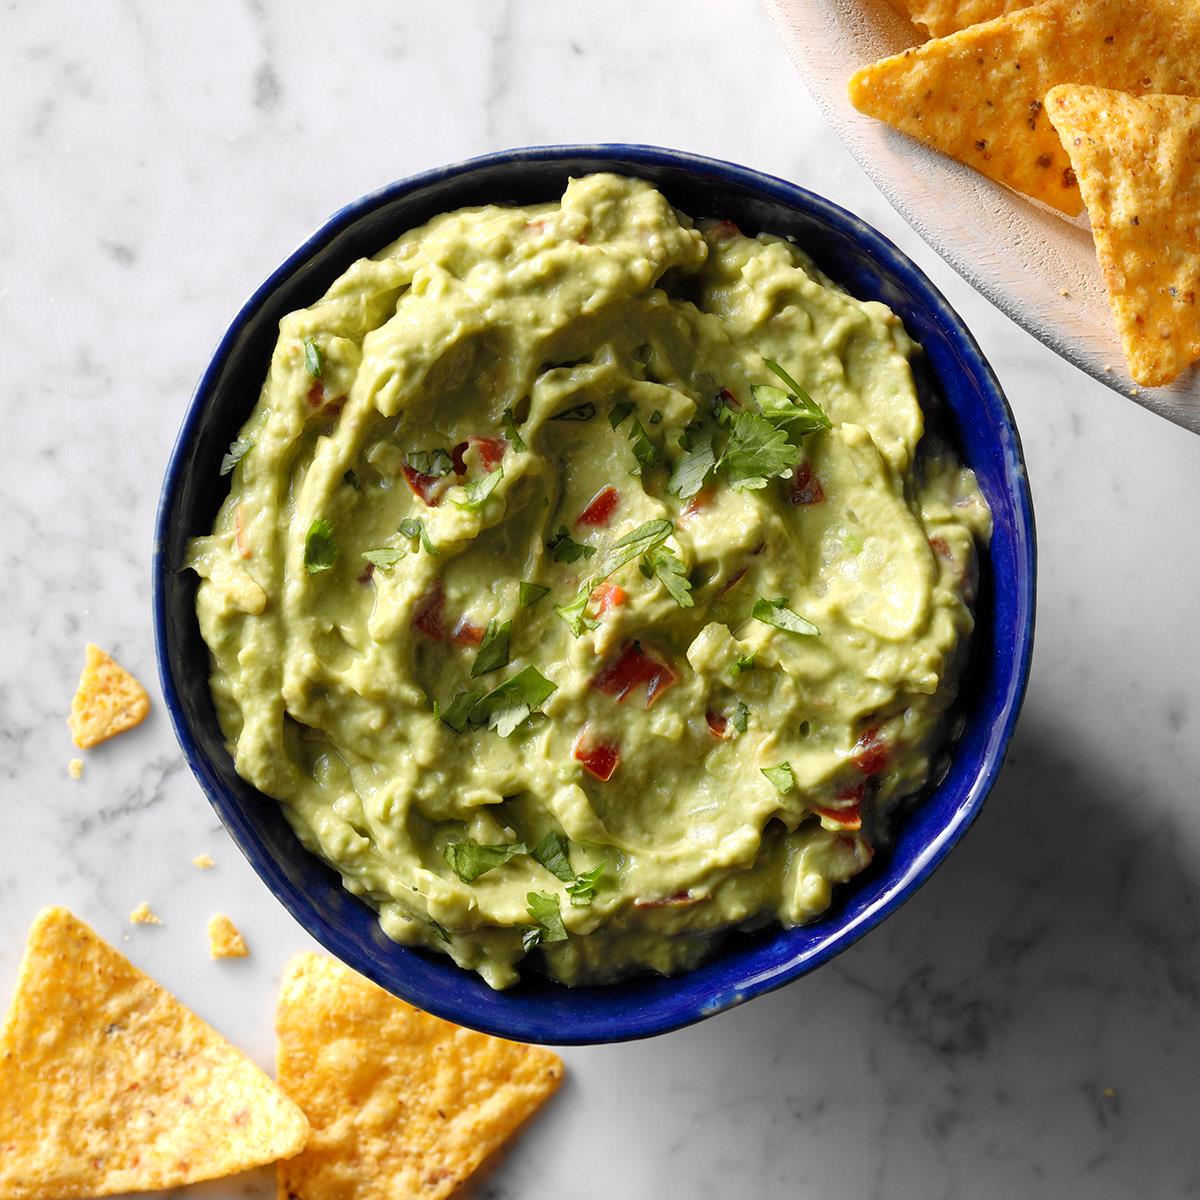 Quiz Answers Beginning With A Guacamole and chips